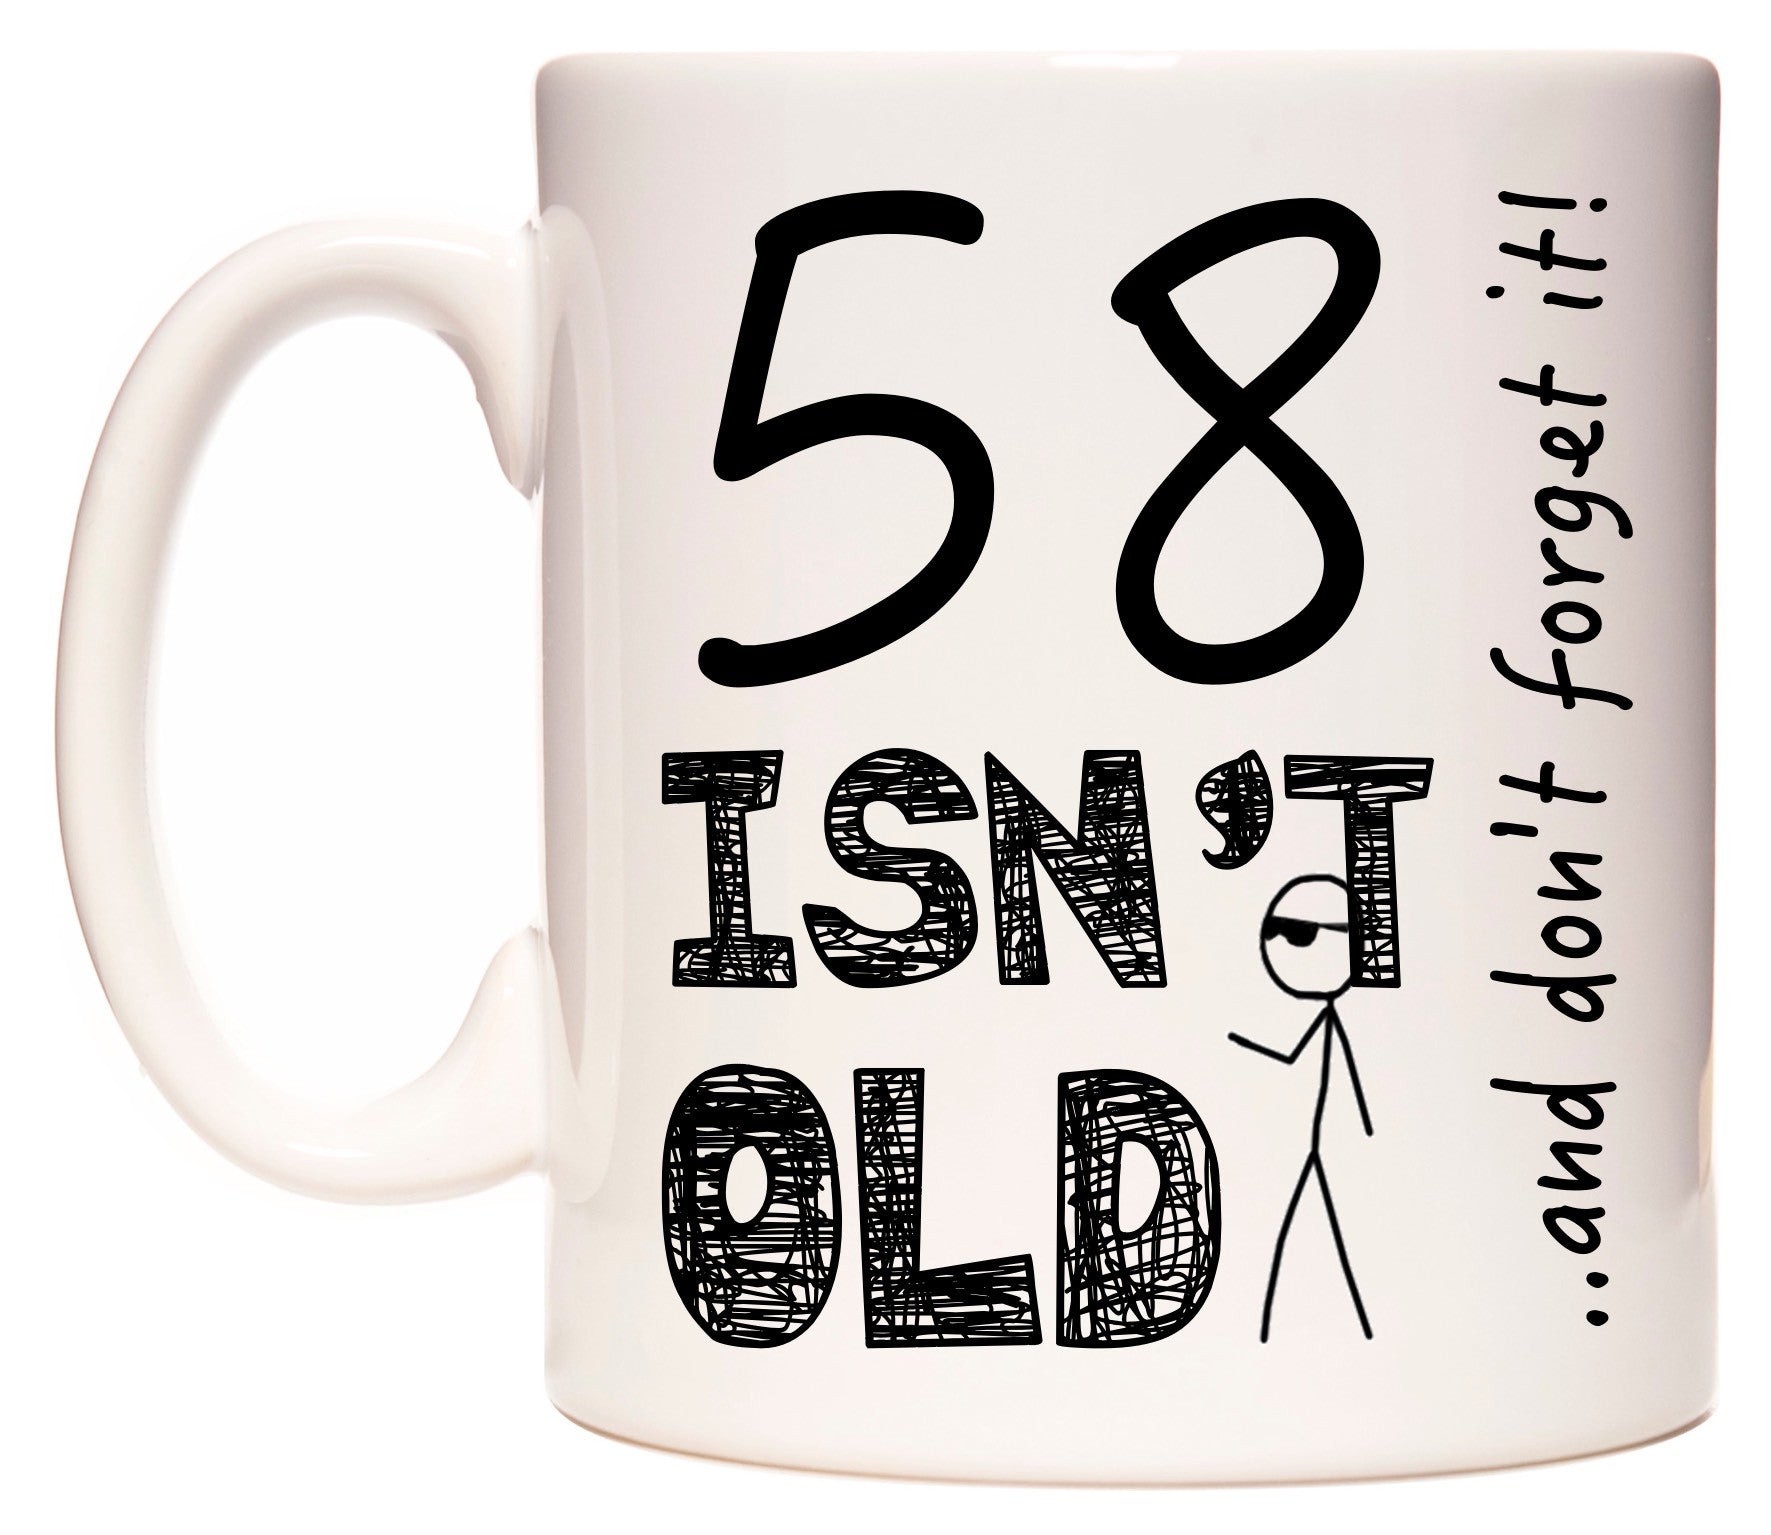 This mug features 58 Isn't Old